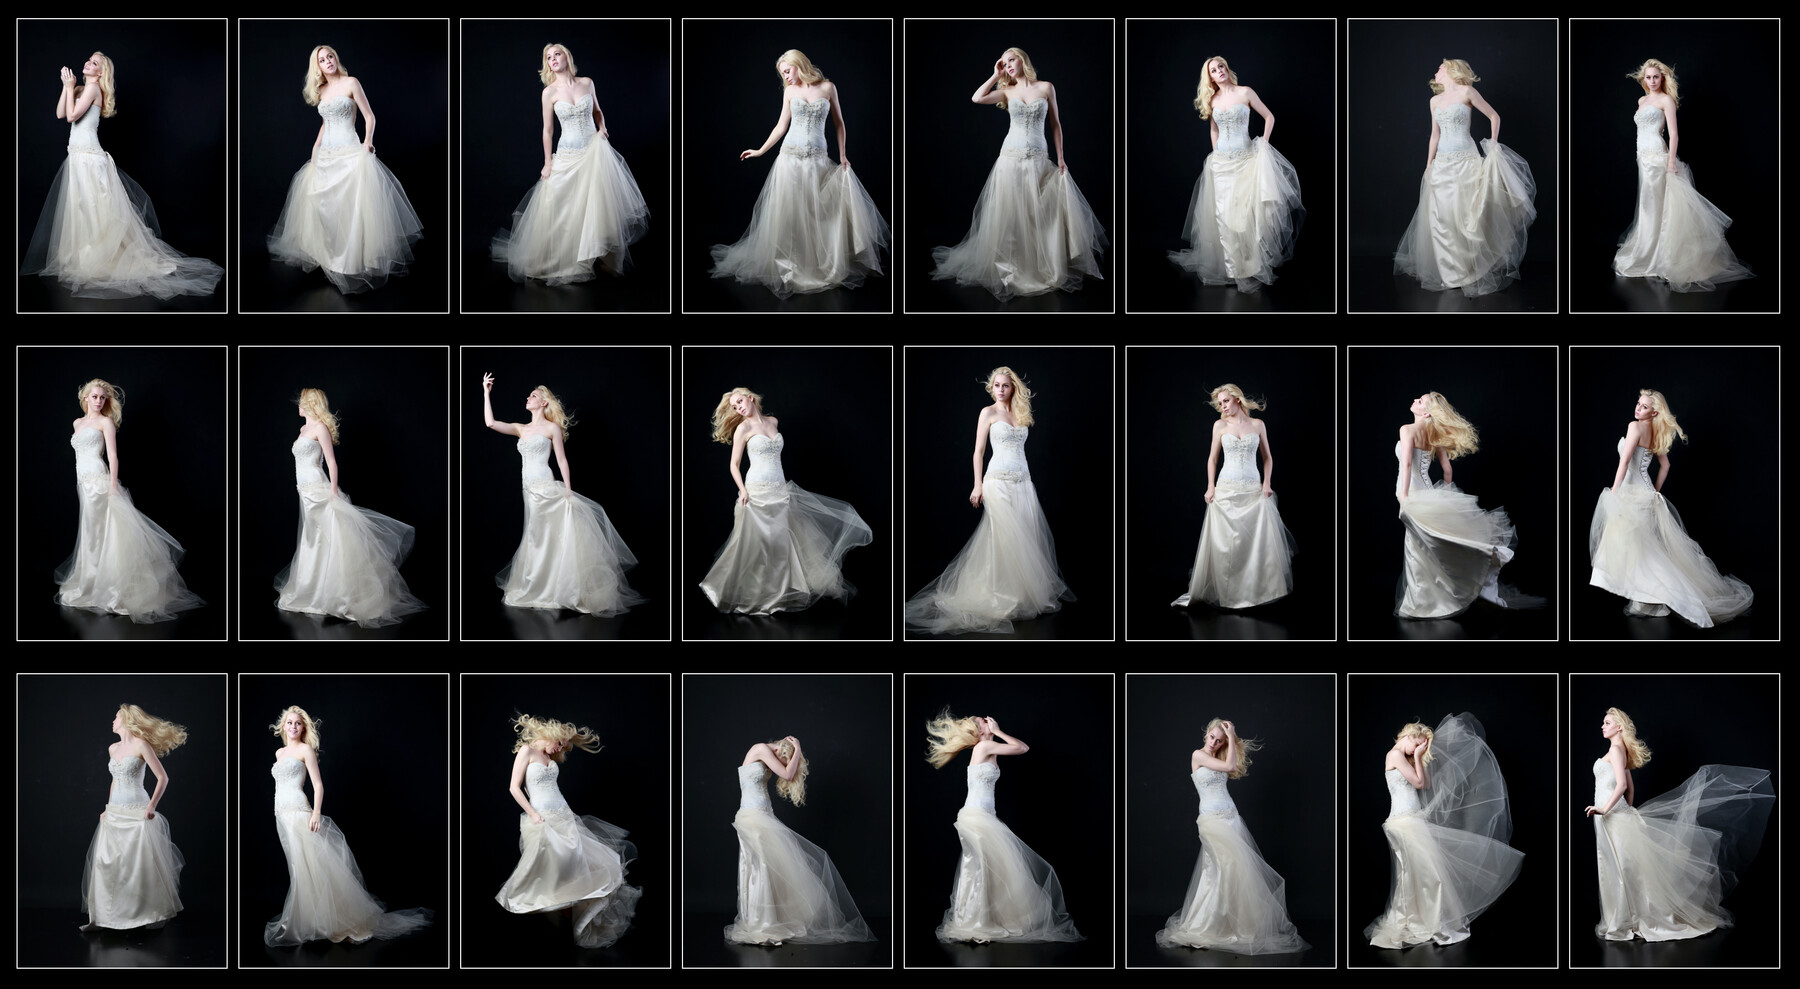 Beautiful Bride Poses Wearing Her White Wedding Dress Stock Photo -  Download Image Now - iStock